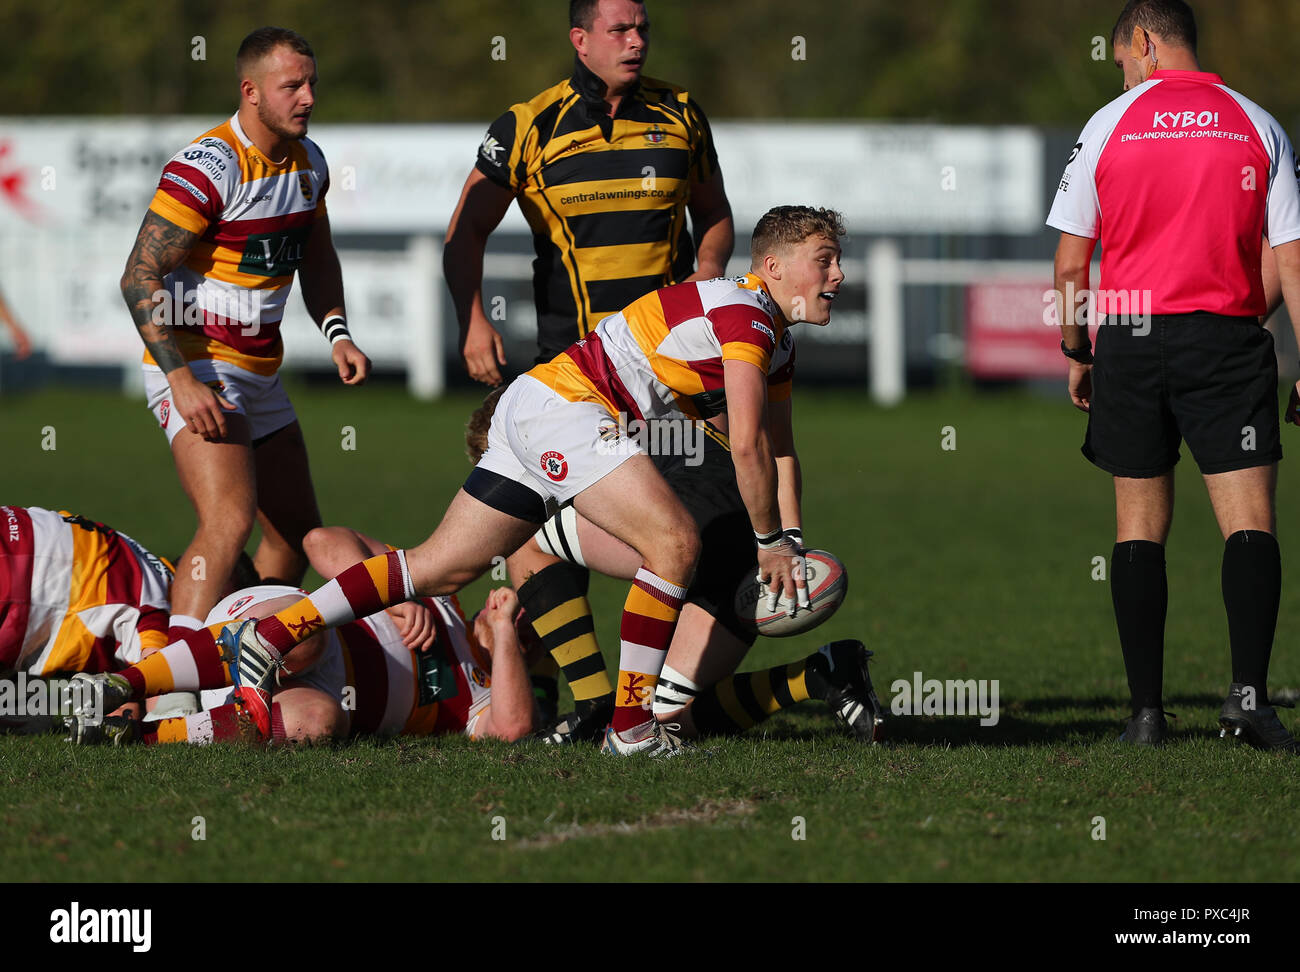 20.10.2018 Hinckley, Leicester, England. Rugby Union, Hinckley rfc v Fylde rfc.    Scrum-half Fergus Warr in action for Fylde during the RFU National League 2 North (NL2N) game played at the Leicester  Road Stadium.    © Phil Hutchinson / Alamy Live News Stock Photo